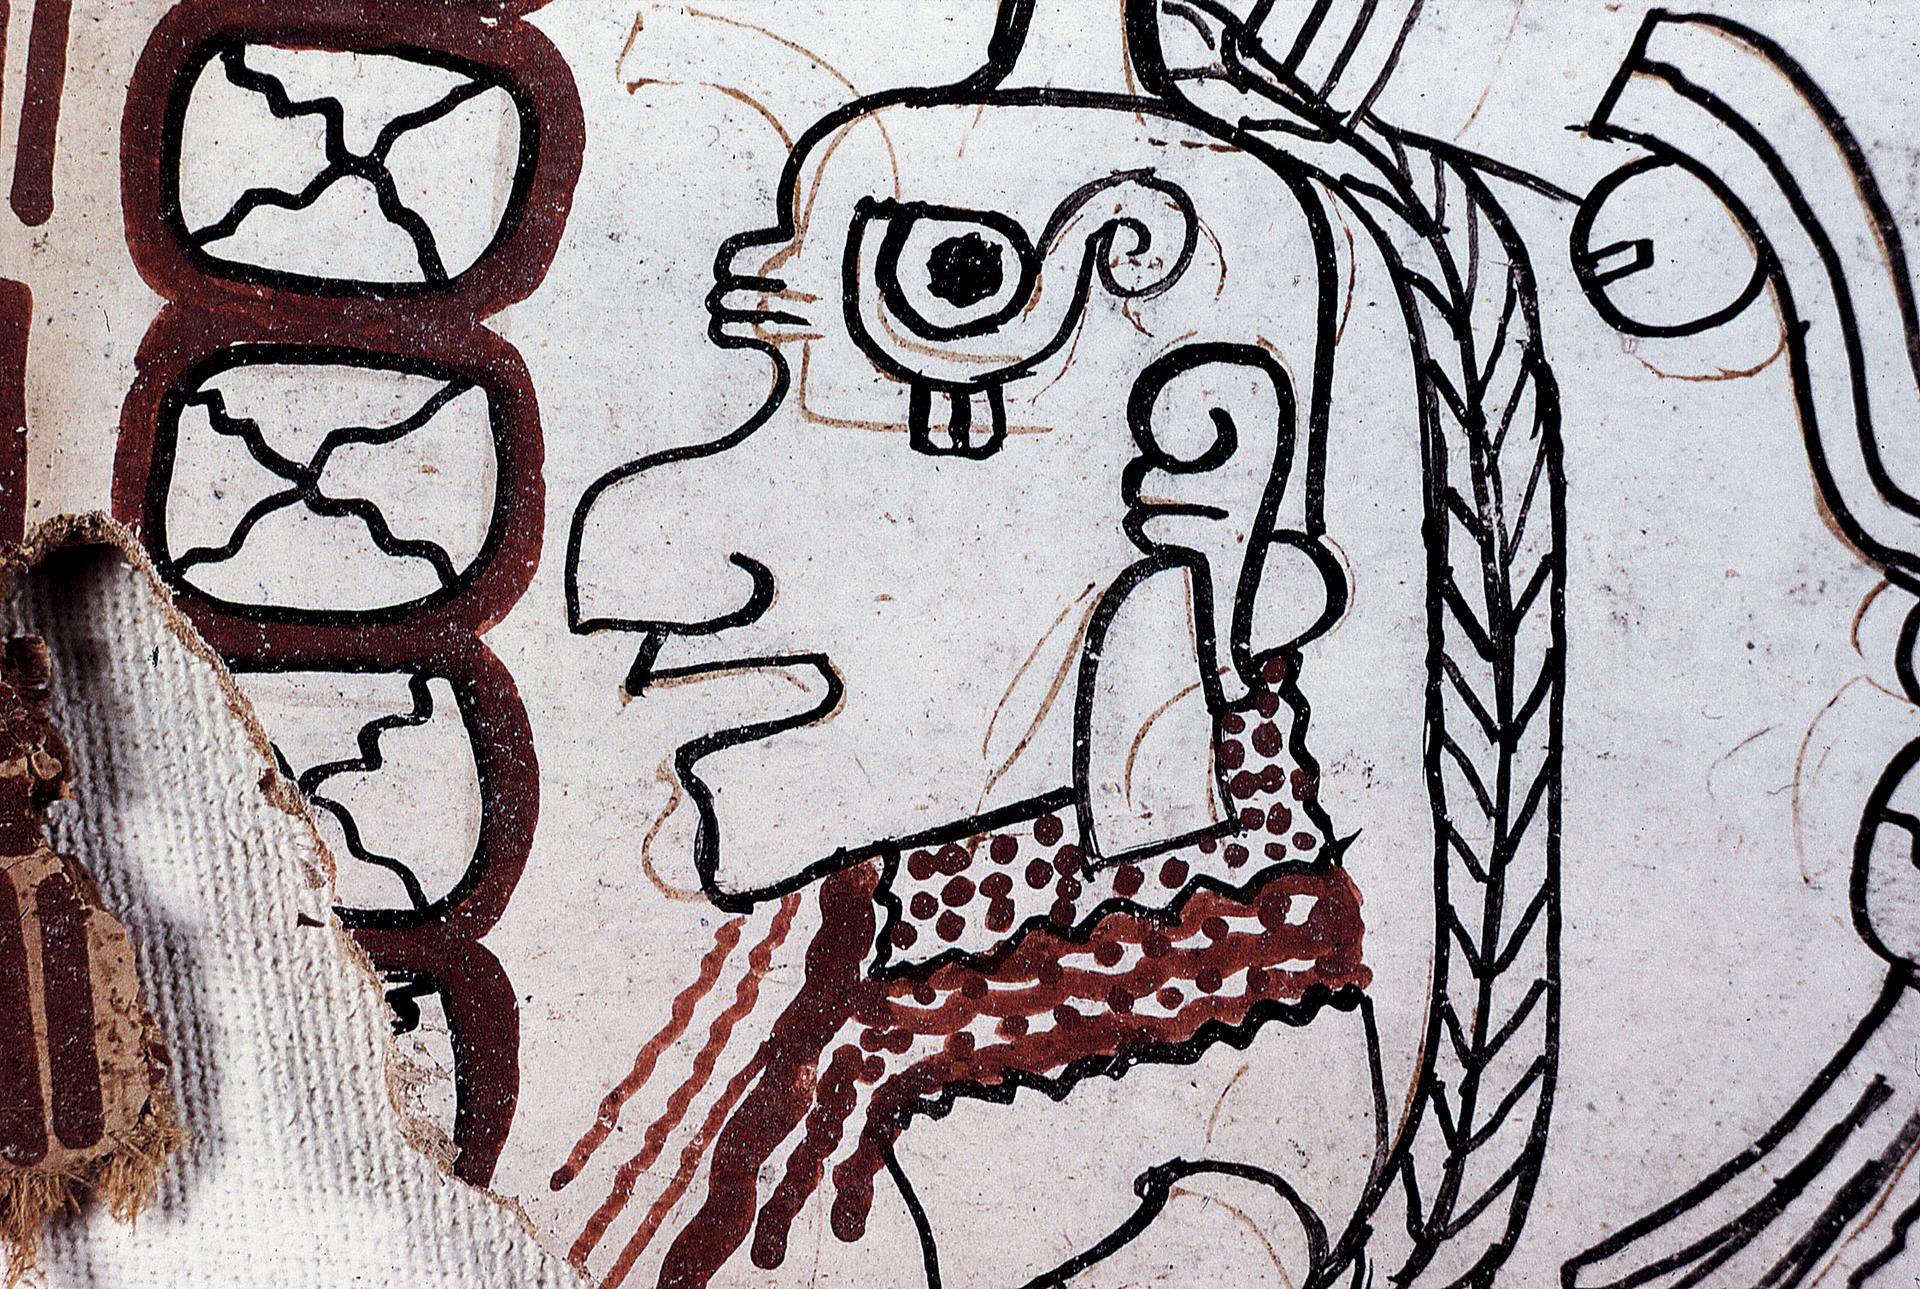 A detail of an image from page 4 of the Grolier Codex with red underpainting vis